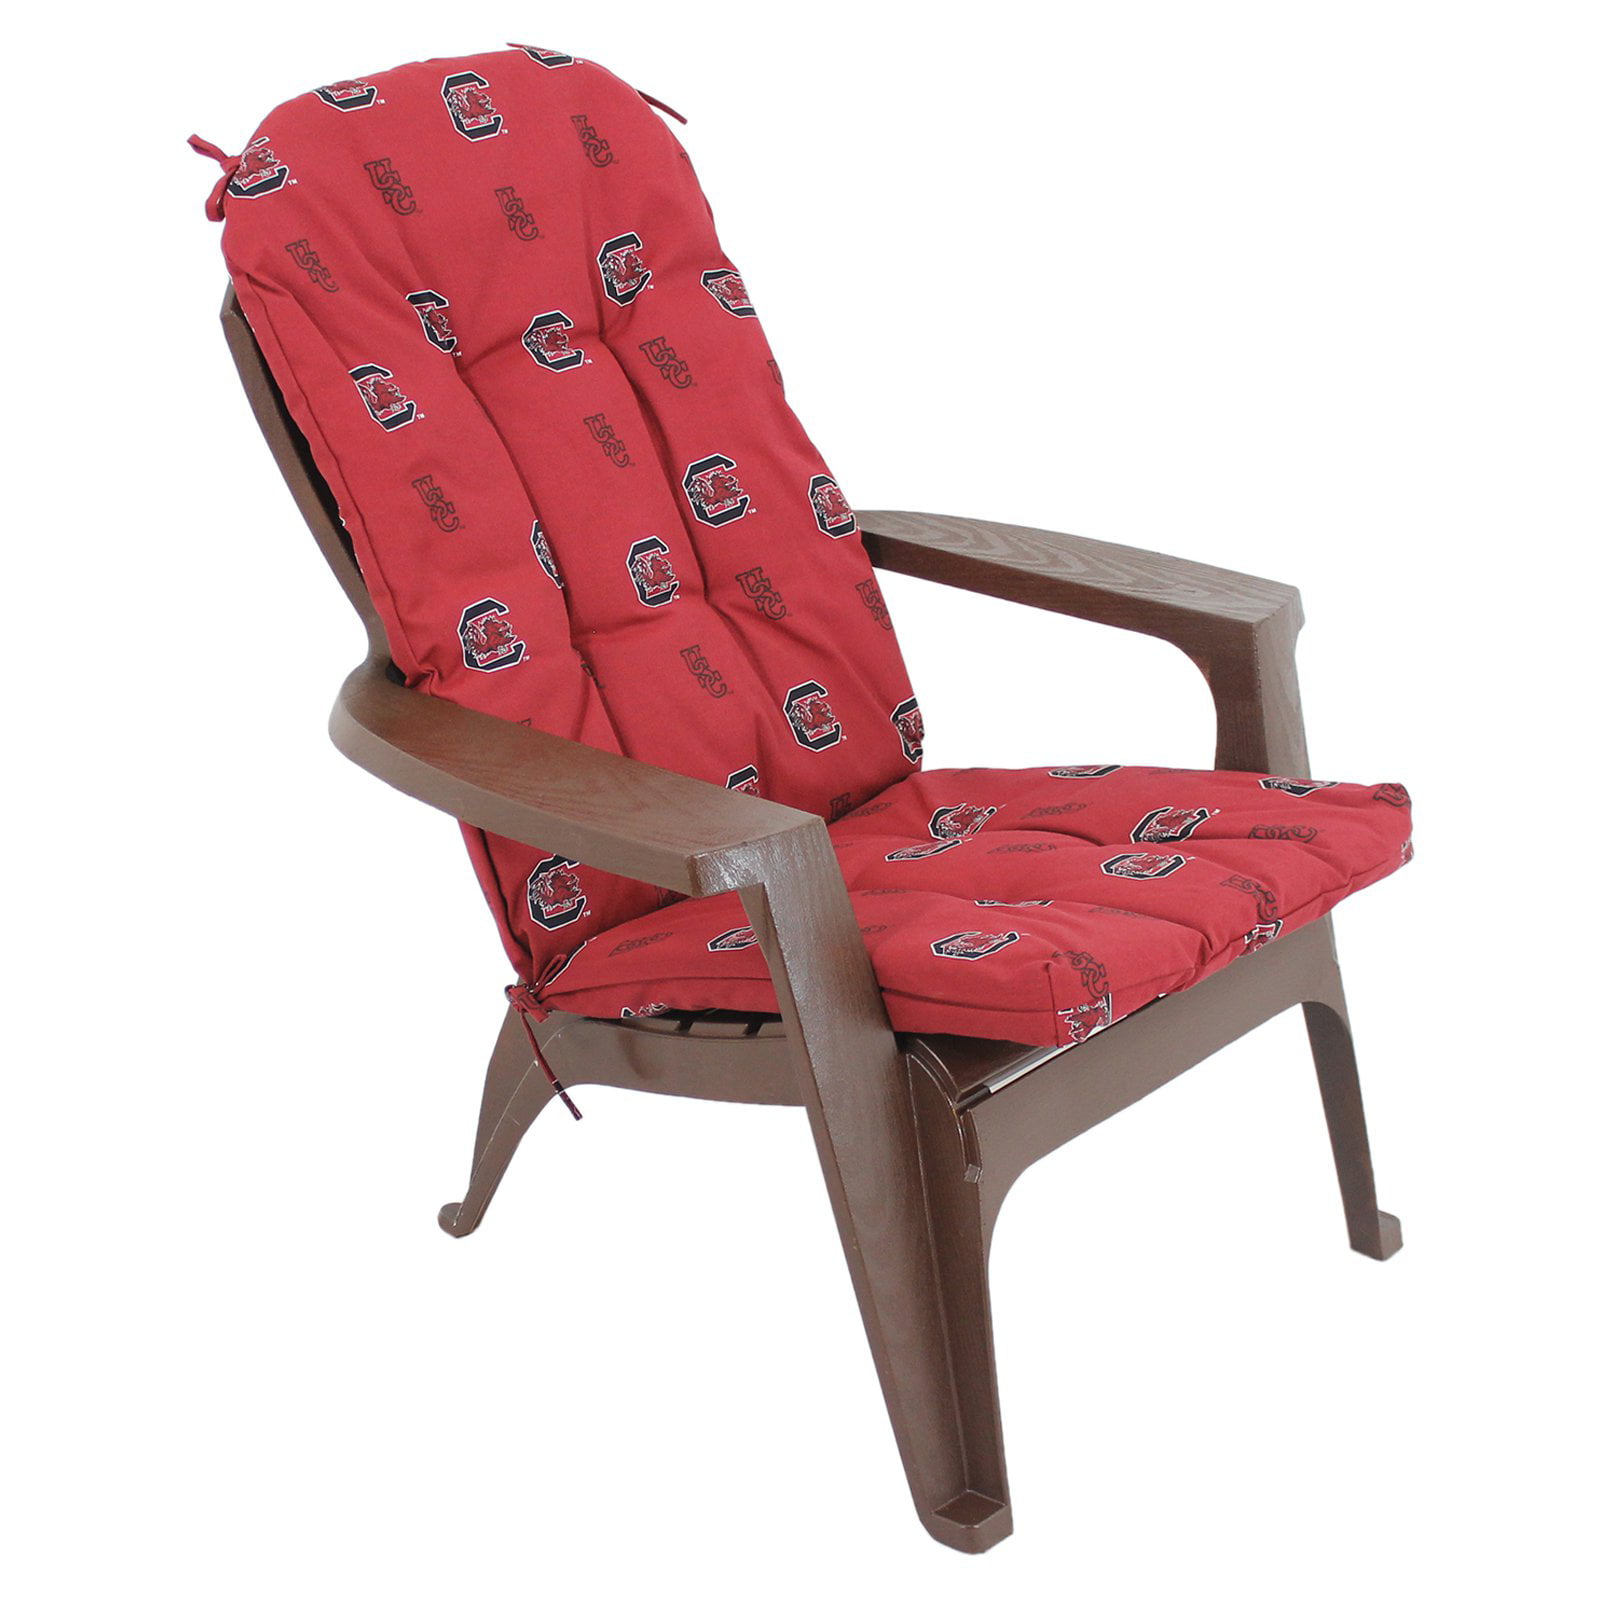 College Covers 49 x 20 in. Adirondack Chair Cushion ...